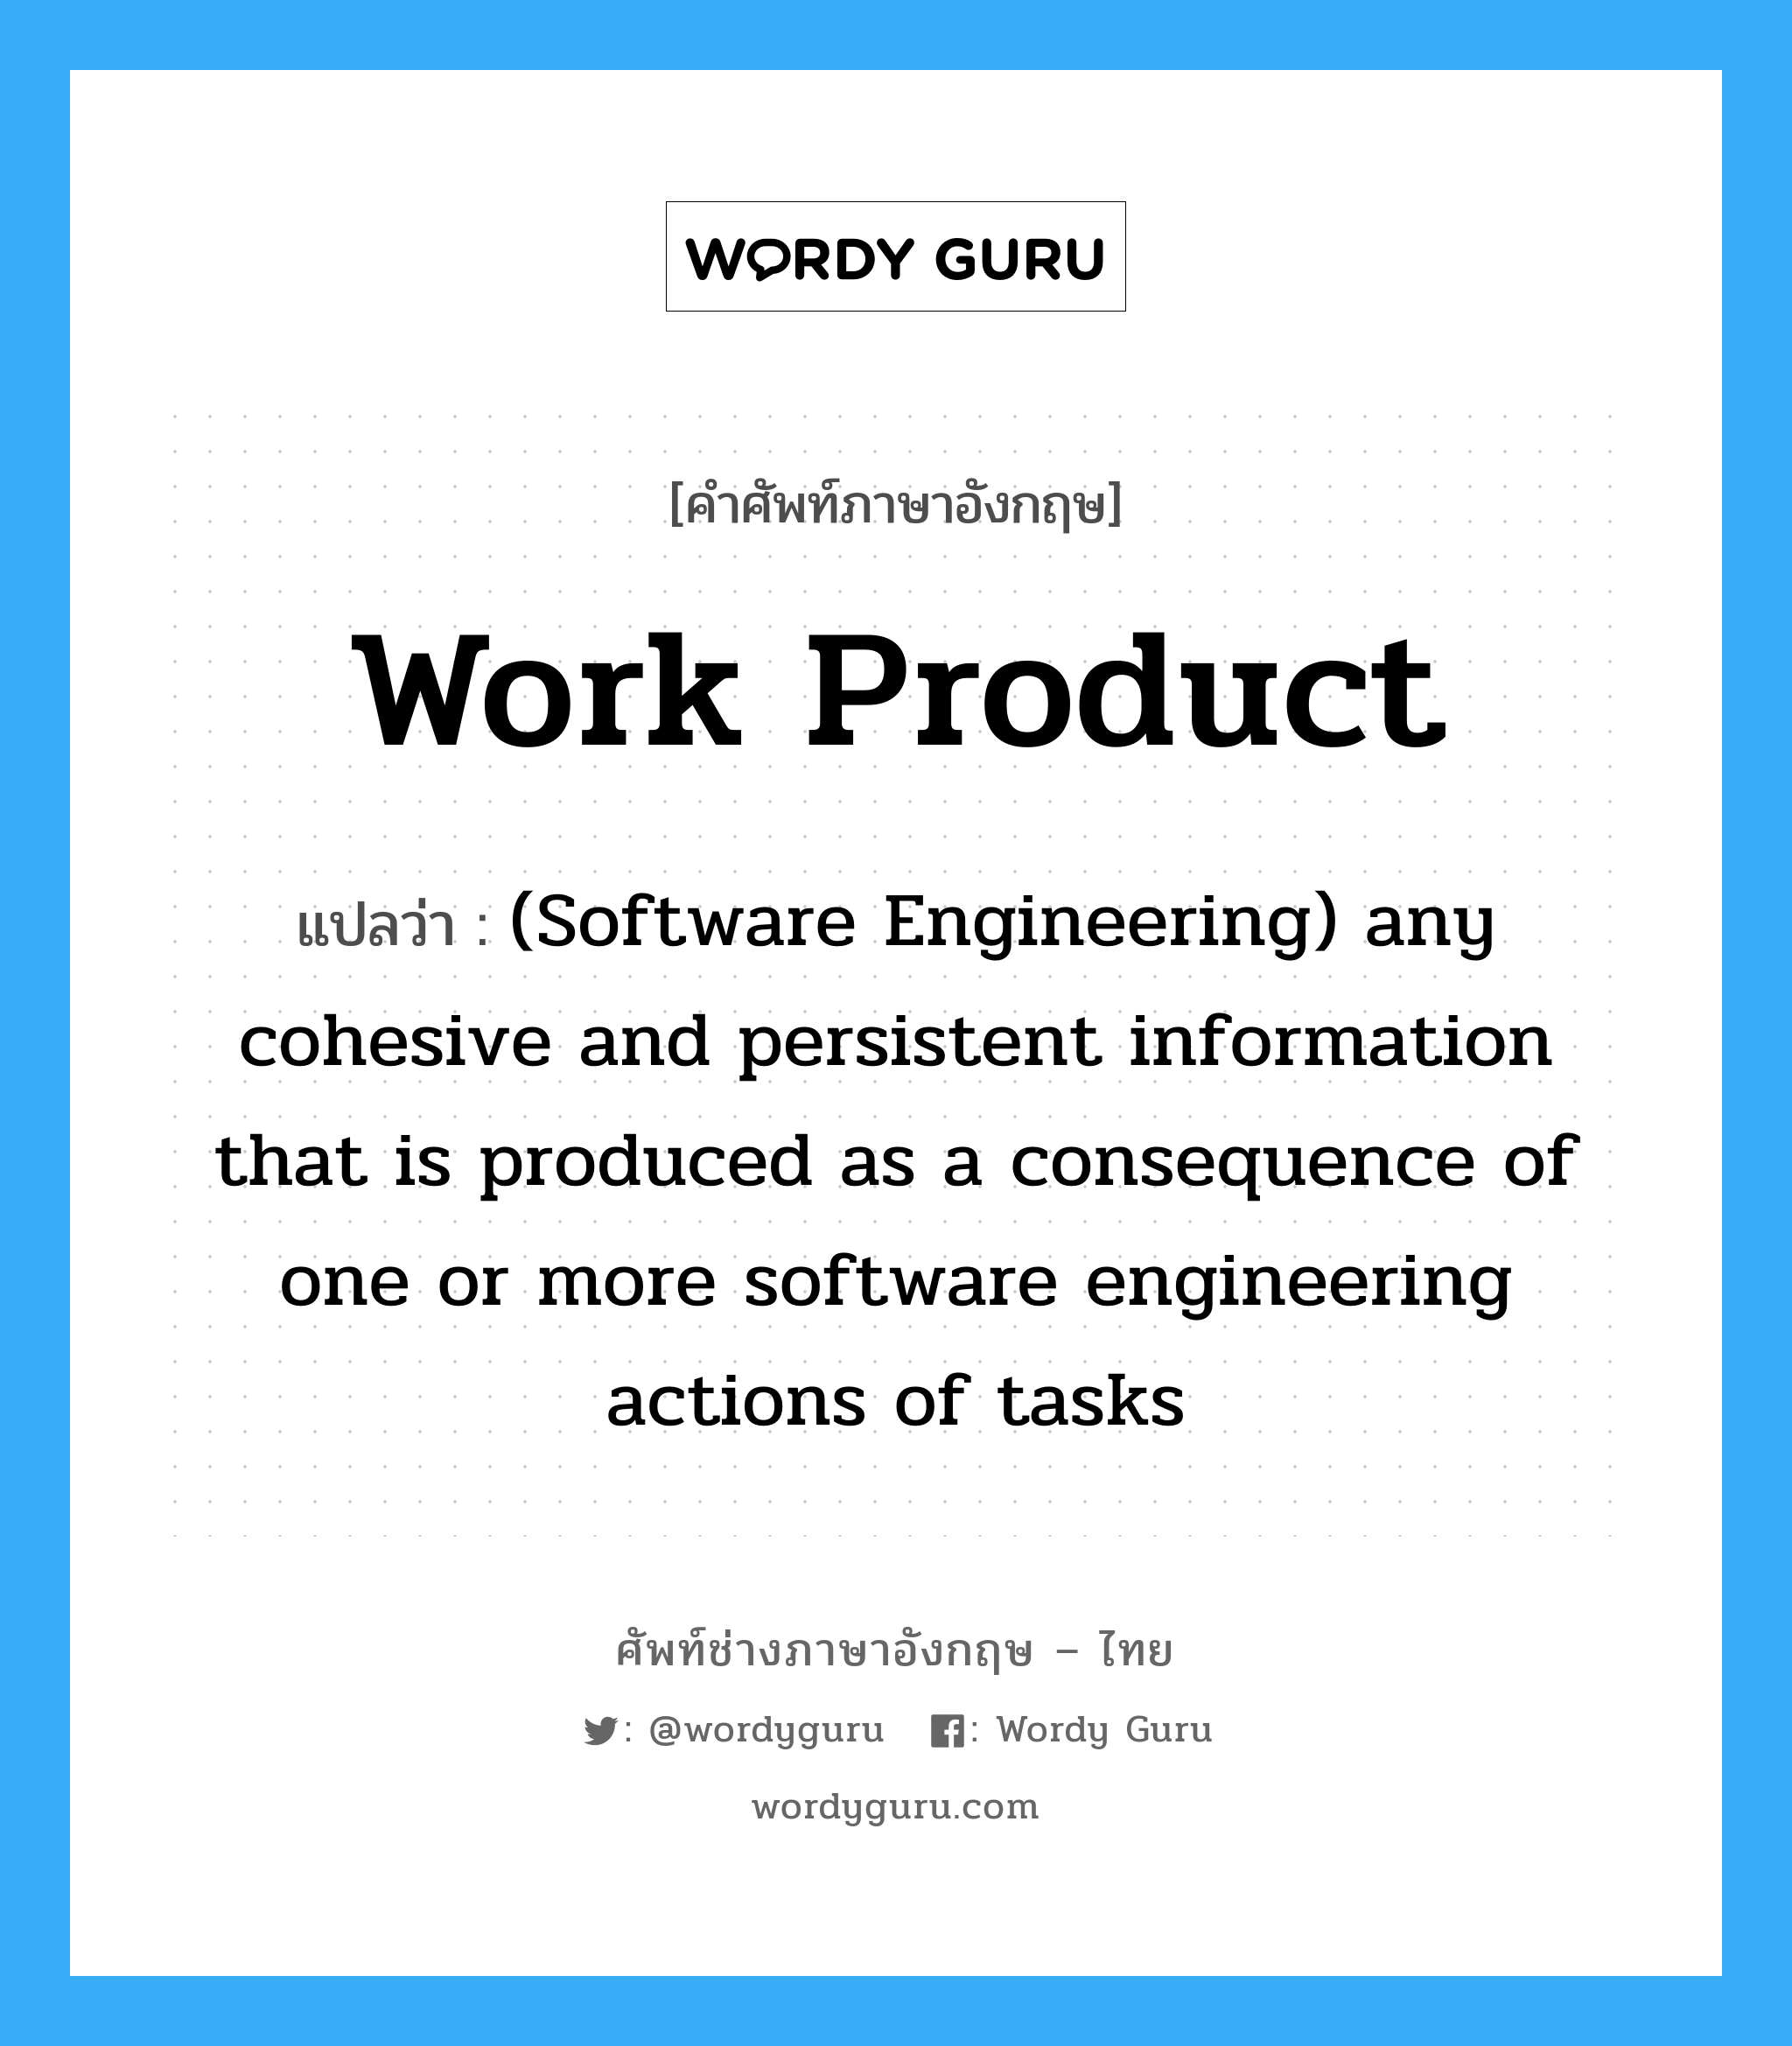 Work product แปลว่า?, คำศัพท์ช่างภาษาอังกฤษ - ไทย Work product คำศัพท์ภาษาอังกฤษ Work product แปลว่า (Software Engineering) any cohesive and persistent information that is produced as a consequence of one or more software engineering actions of tasks